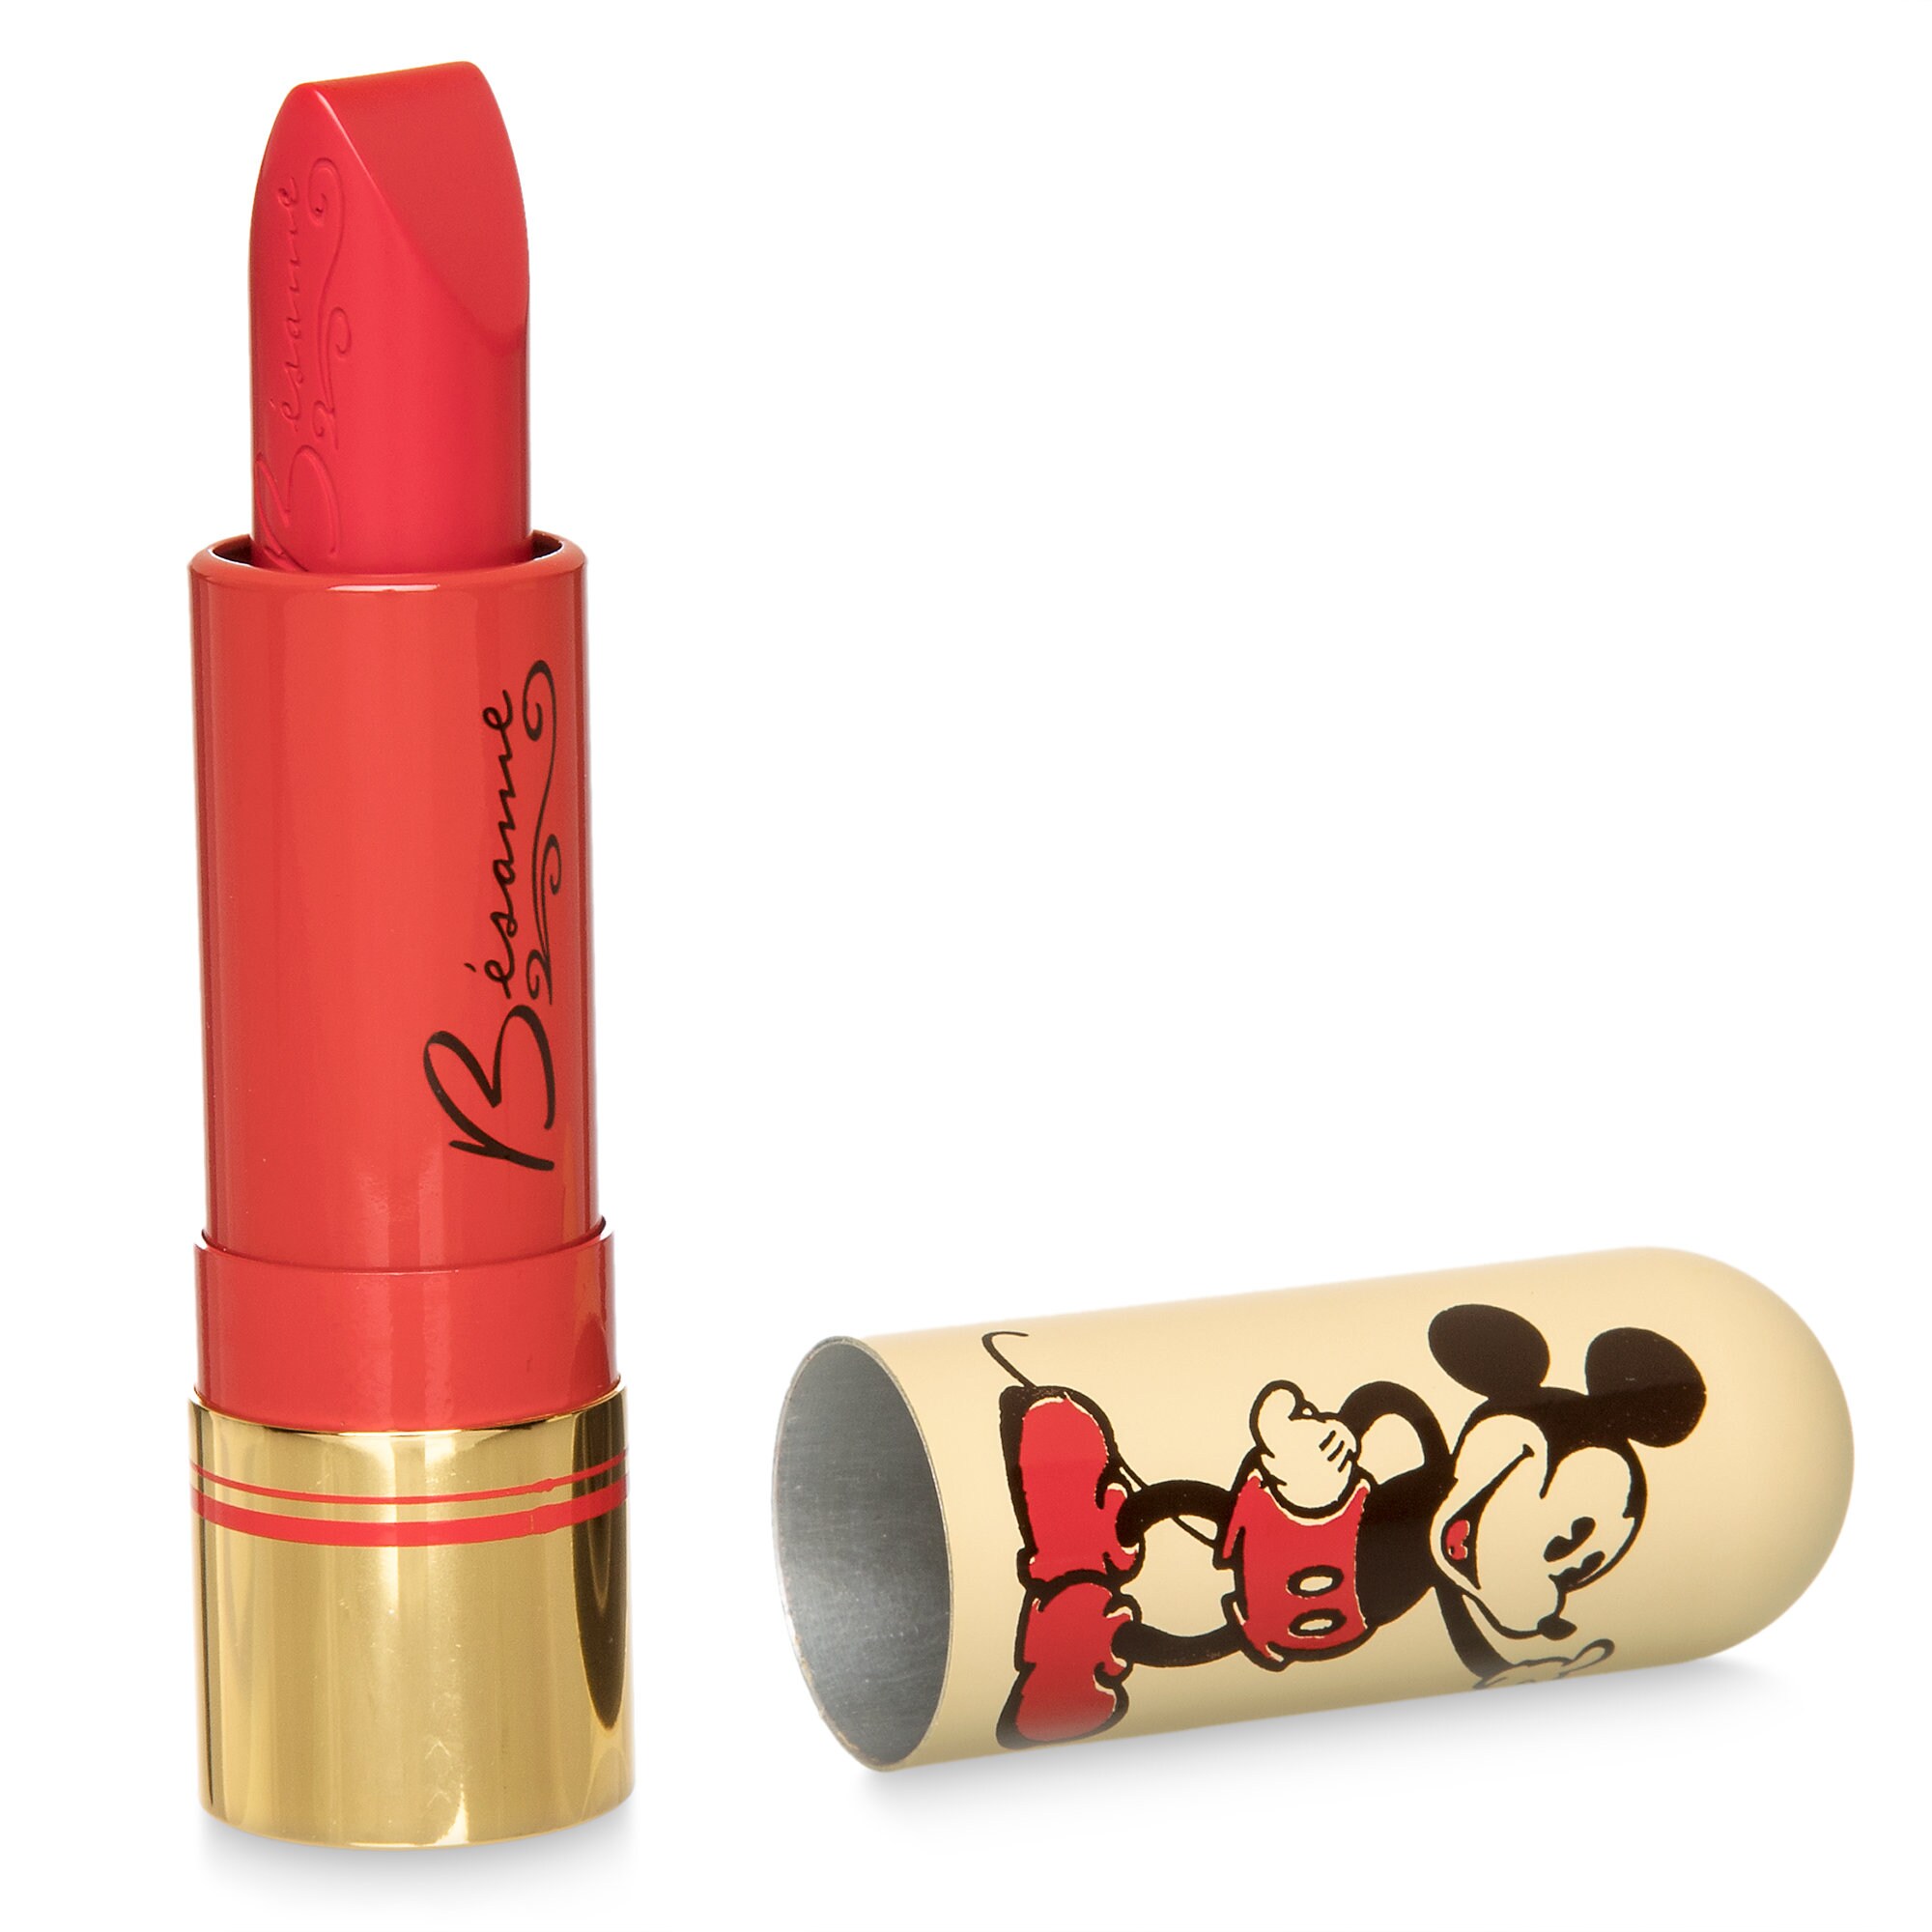 Mickey Mouse Lipsticks and Mirror Set by Bésame - Limited Edition